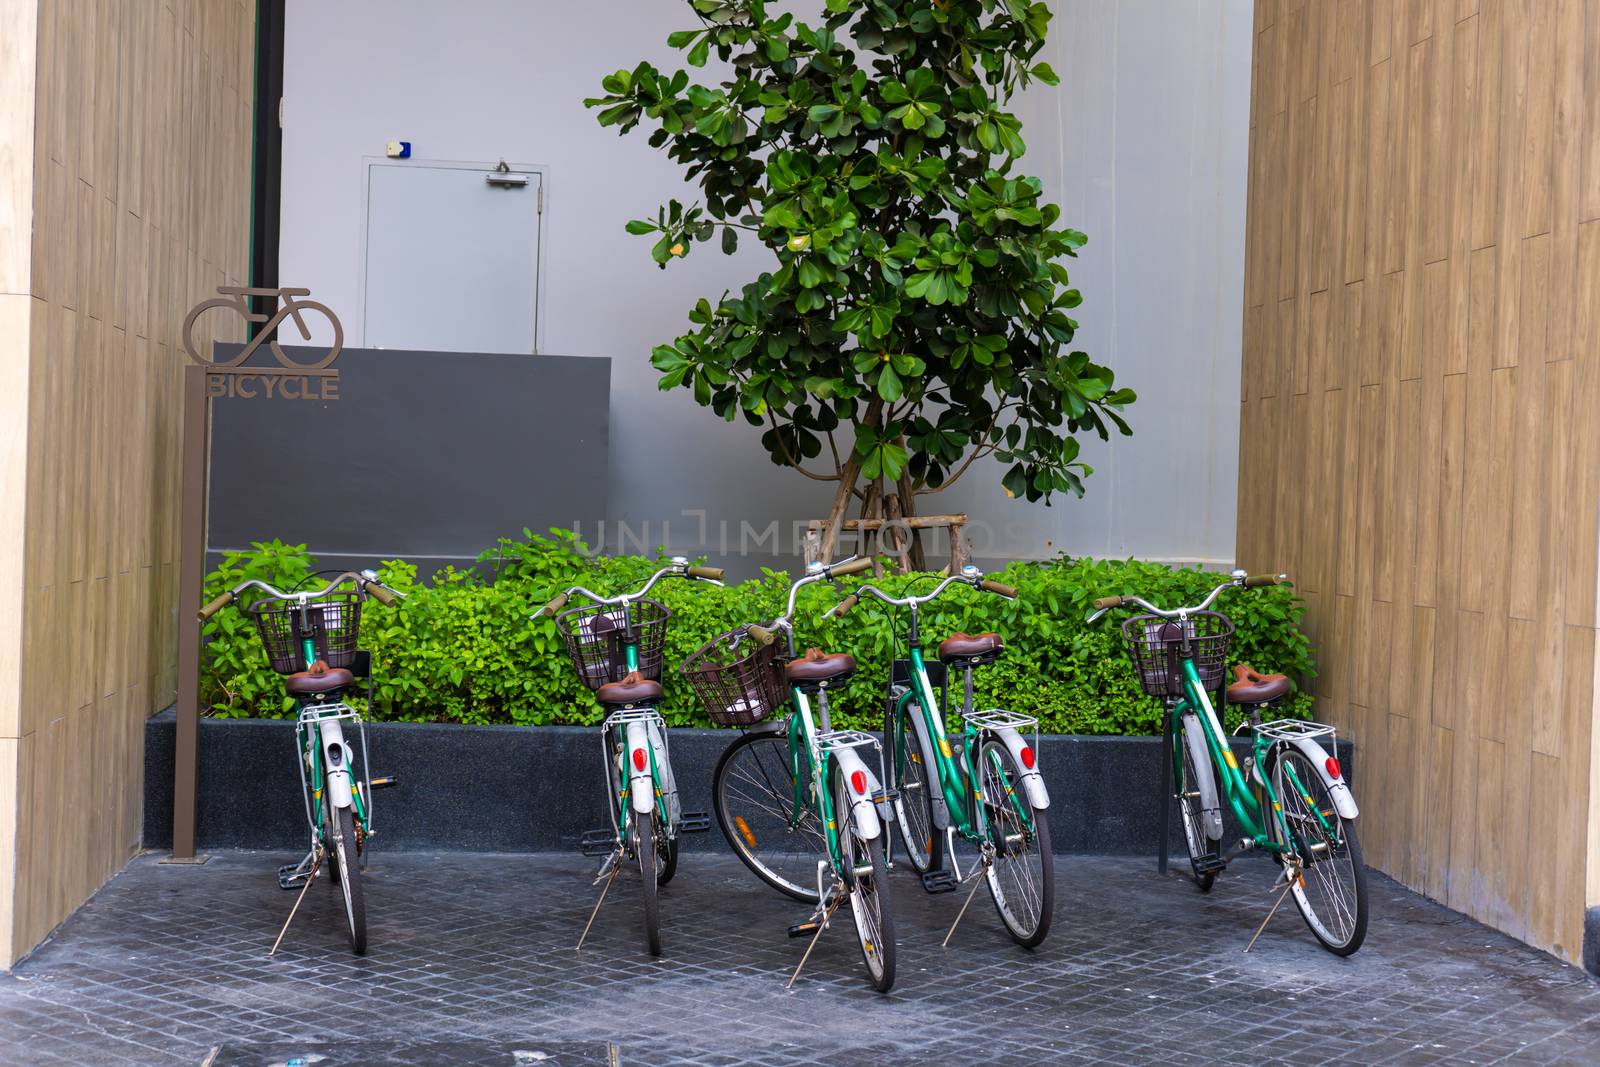 Bicycle parking near a green tree close up by Try_my_best